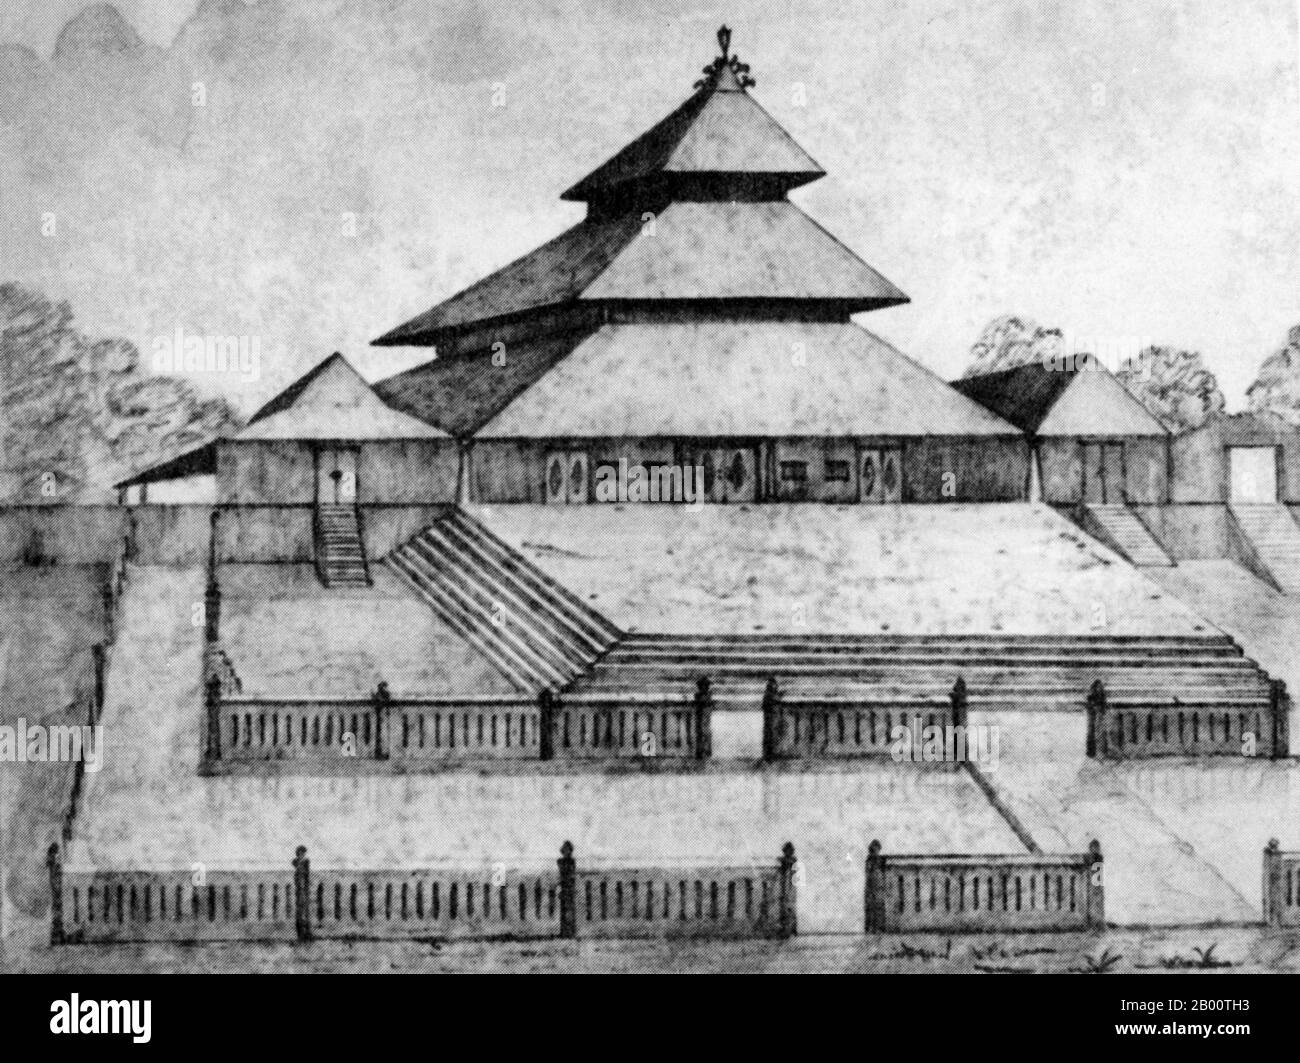 Indonesia: An 1847 pencil sketch of Surakarta mosque in central Java.  Built during the 1760s, the pyramid-shaped Great Mosque of Surakarta is considered one of the most ornate and impressive examples of Javanese architecture. Stock Photo